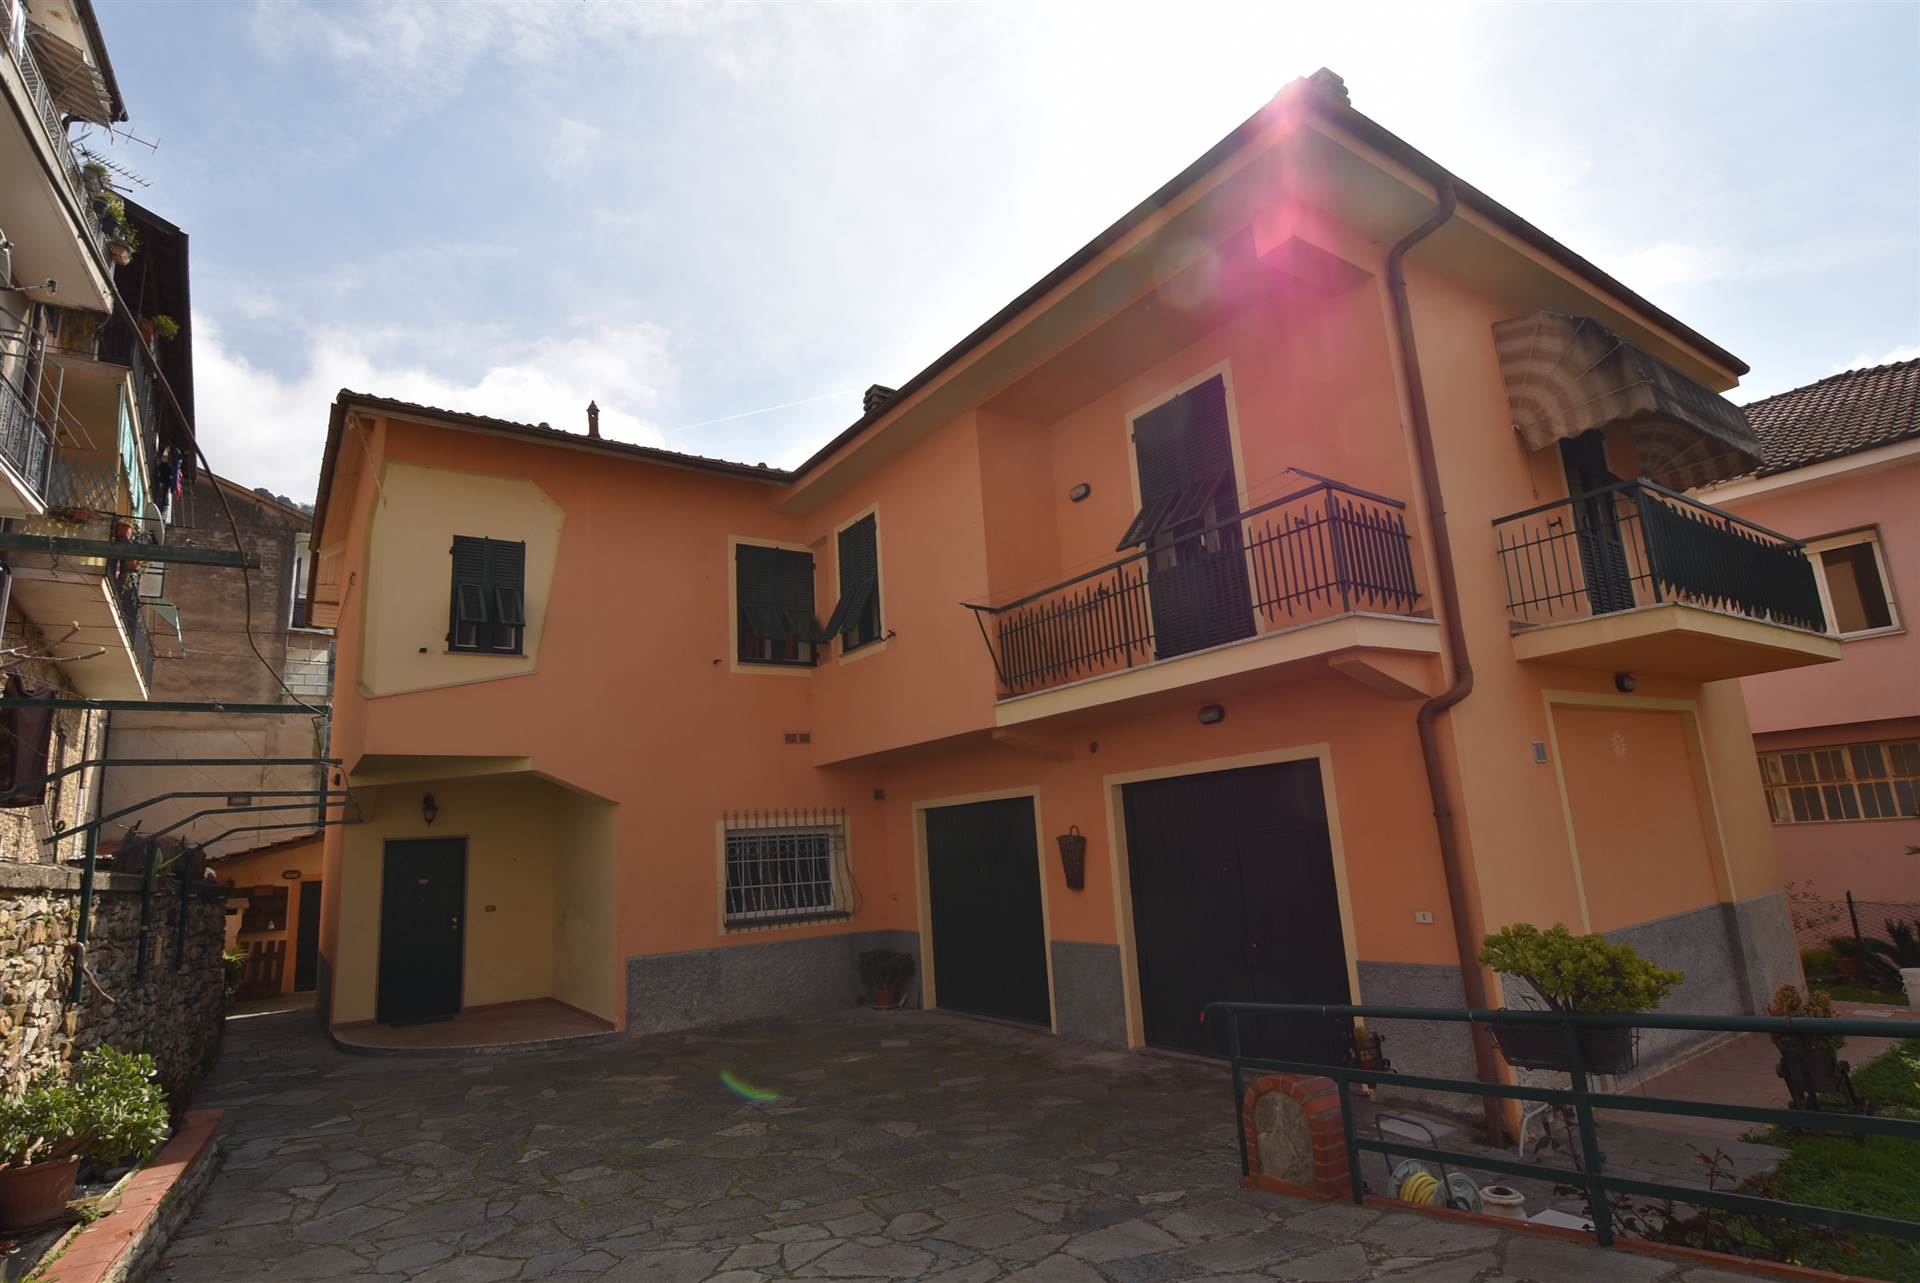 PONTEDASSIO, Duplex villa for sale of 200 Sq. mt., Restored, Heating Individual heating system, Energetic class: G, Epi: 250,15 kwh/m2 year, composed 